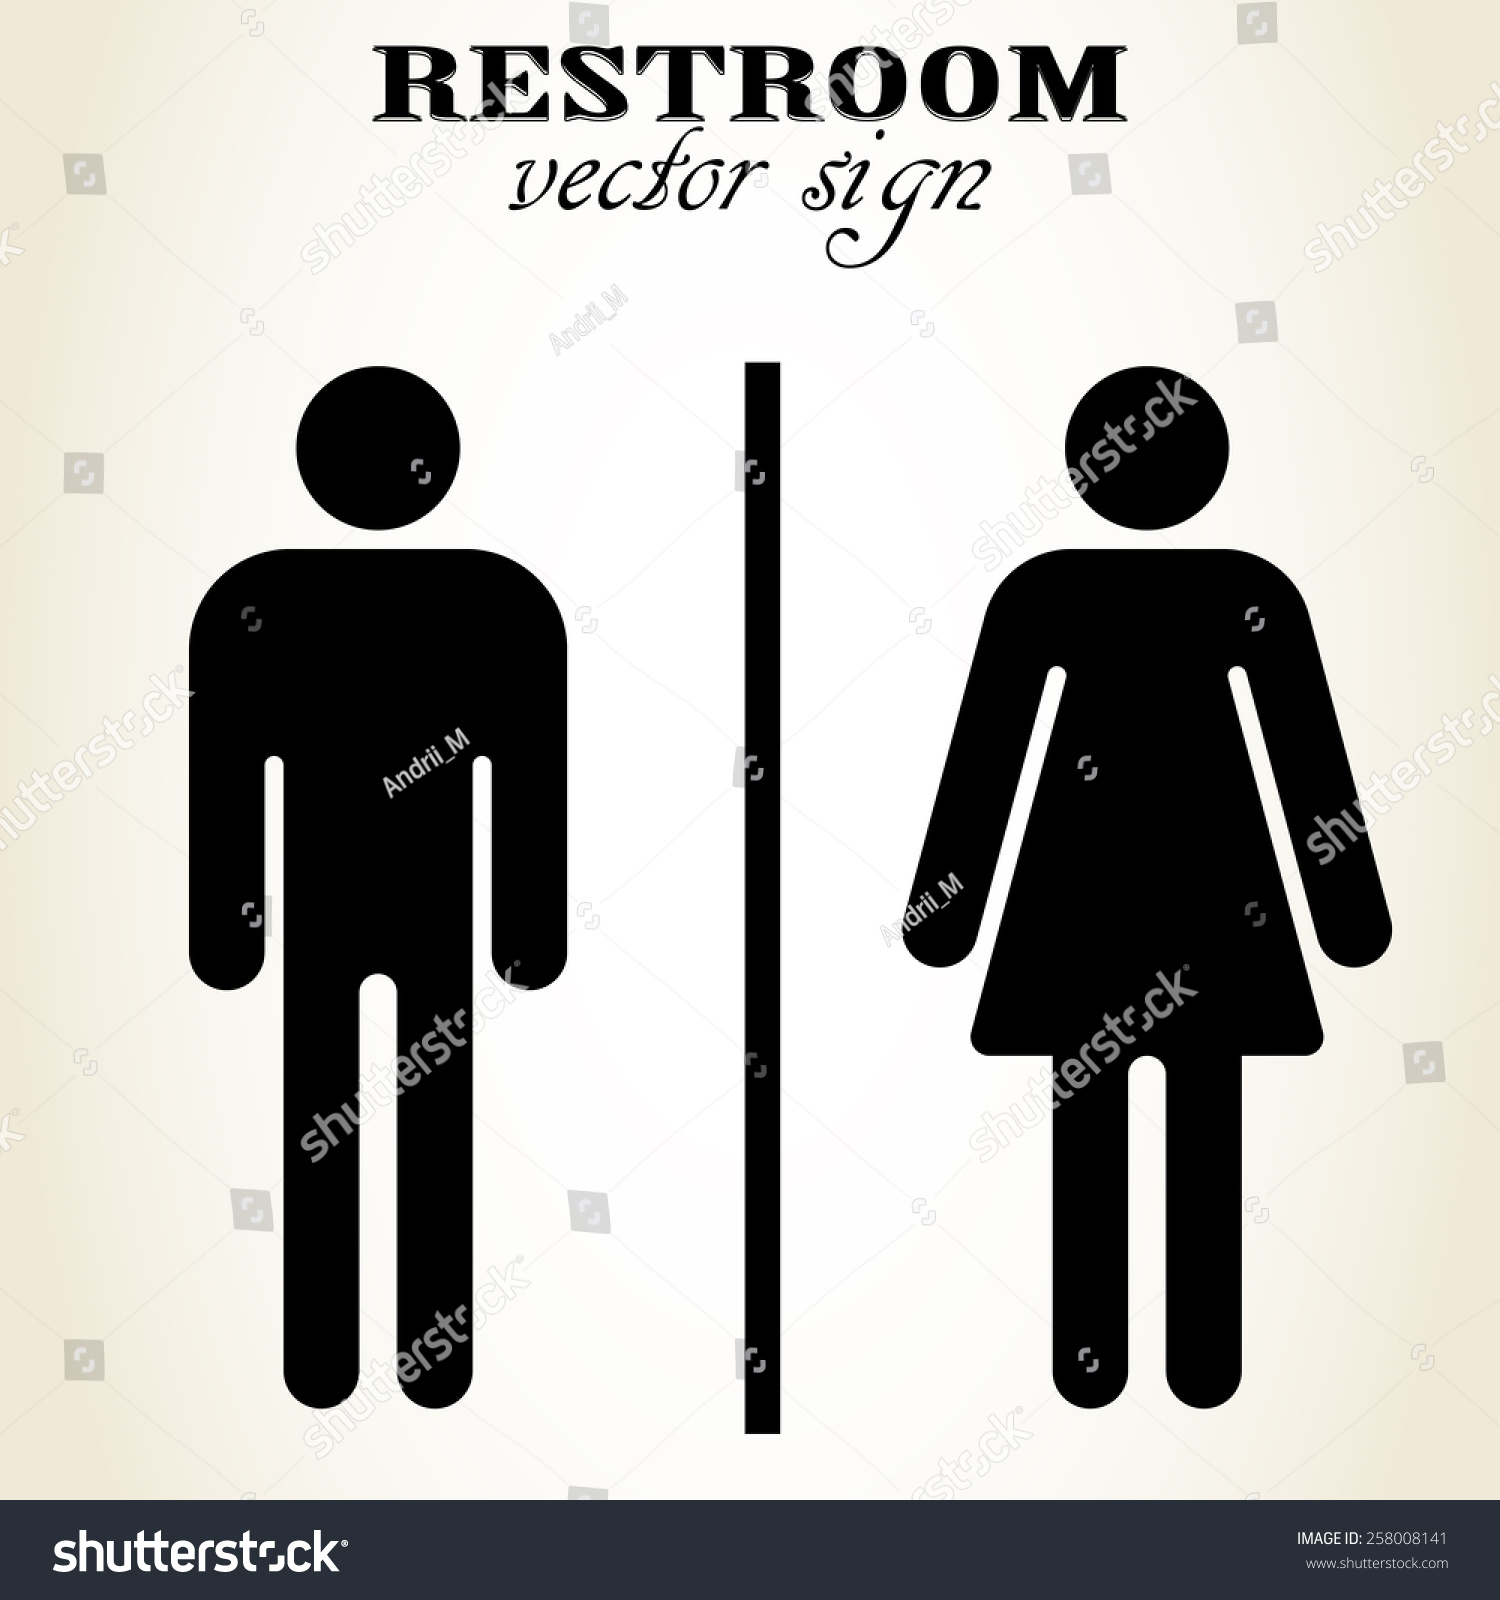 Image result for men and women symbols at public toilets